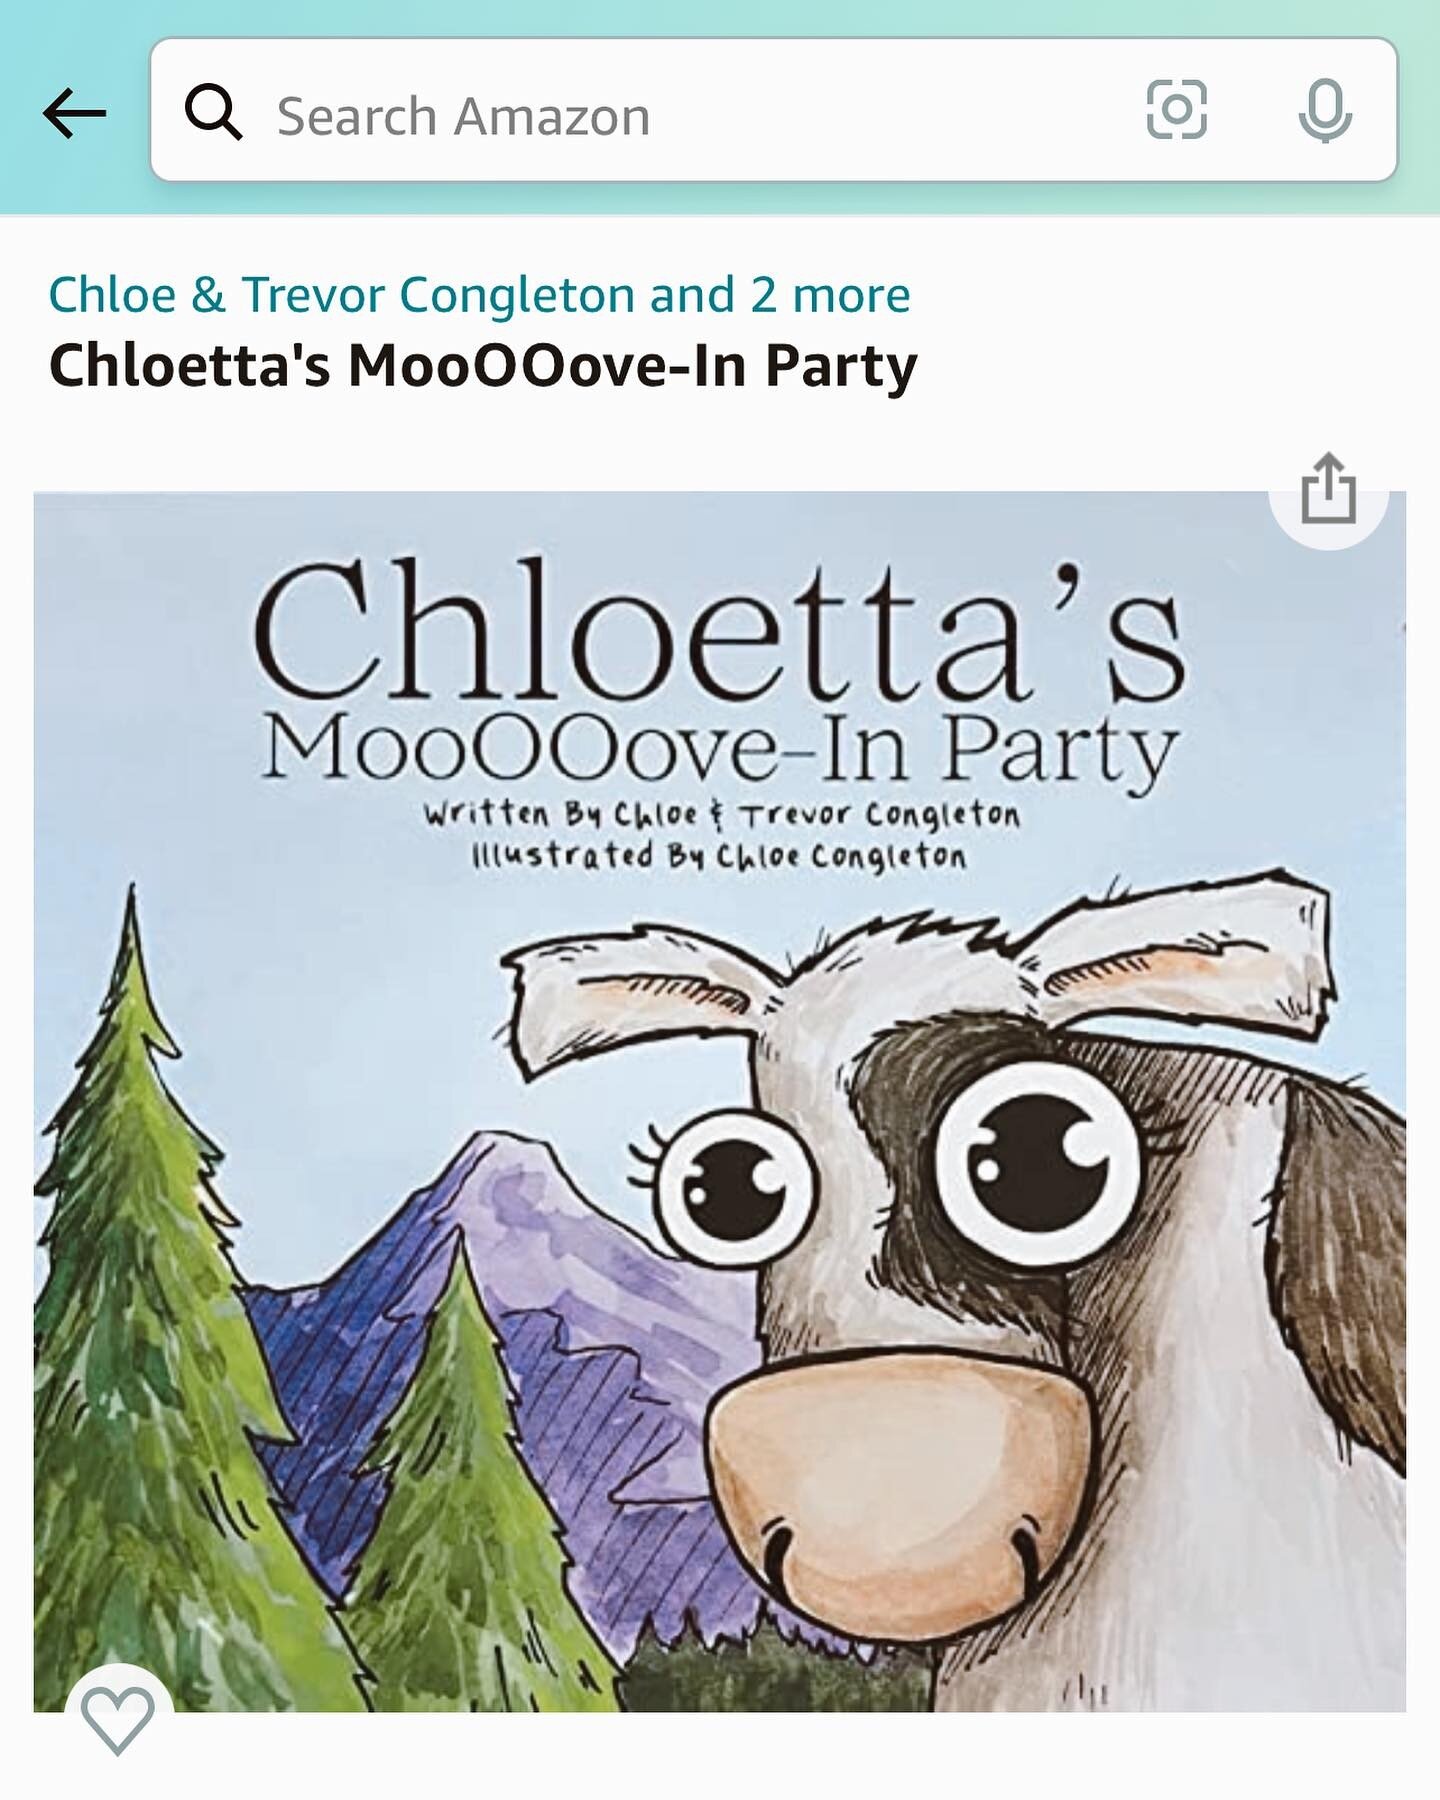 Guess what?!!?! We are officially on Amazon!!!!!!!!! #amazonfinds #amazonchildrensbooks #childrensbooks #unfoldedfables #chloettacow